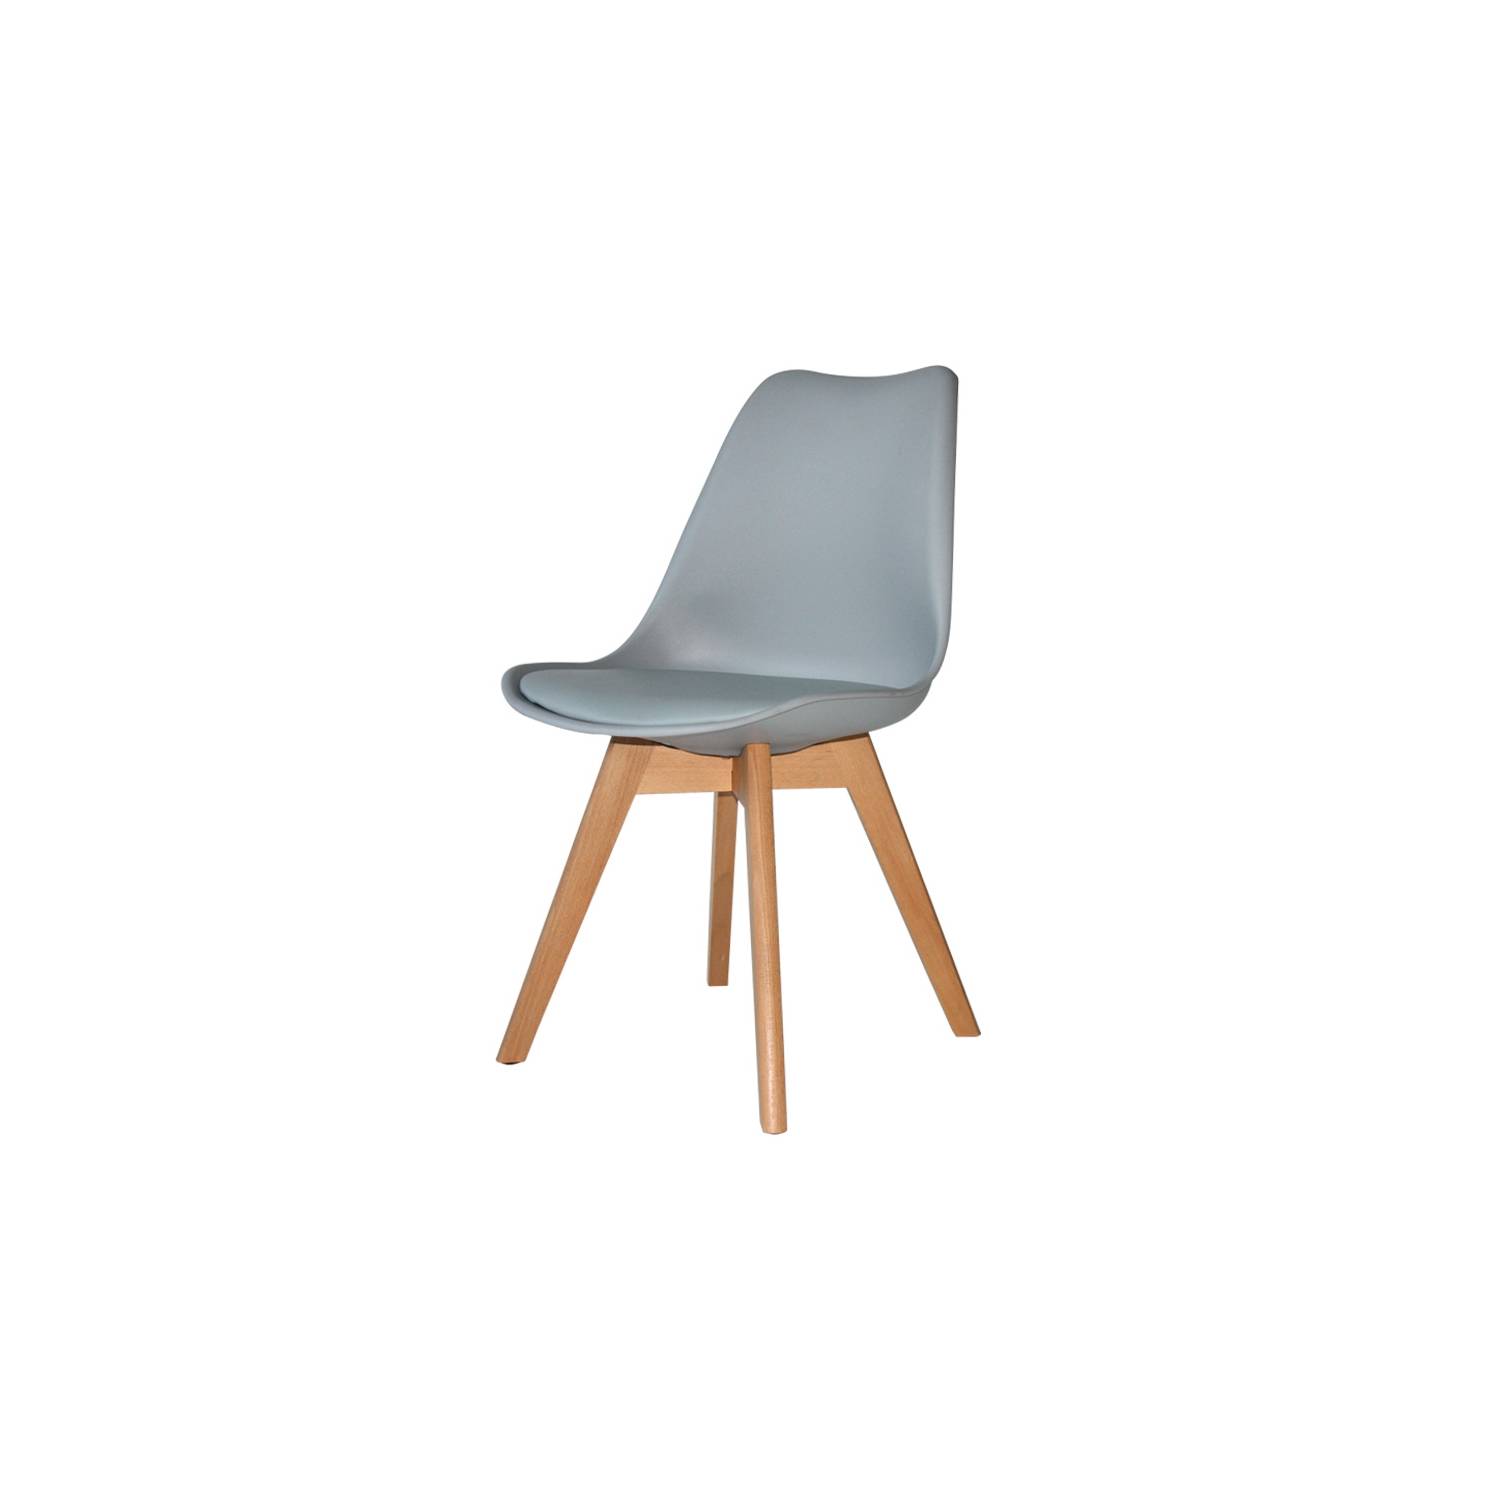 SILLA NEW TOWER WOOD GRIS